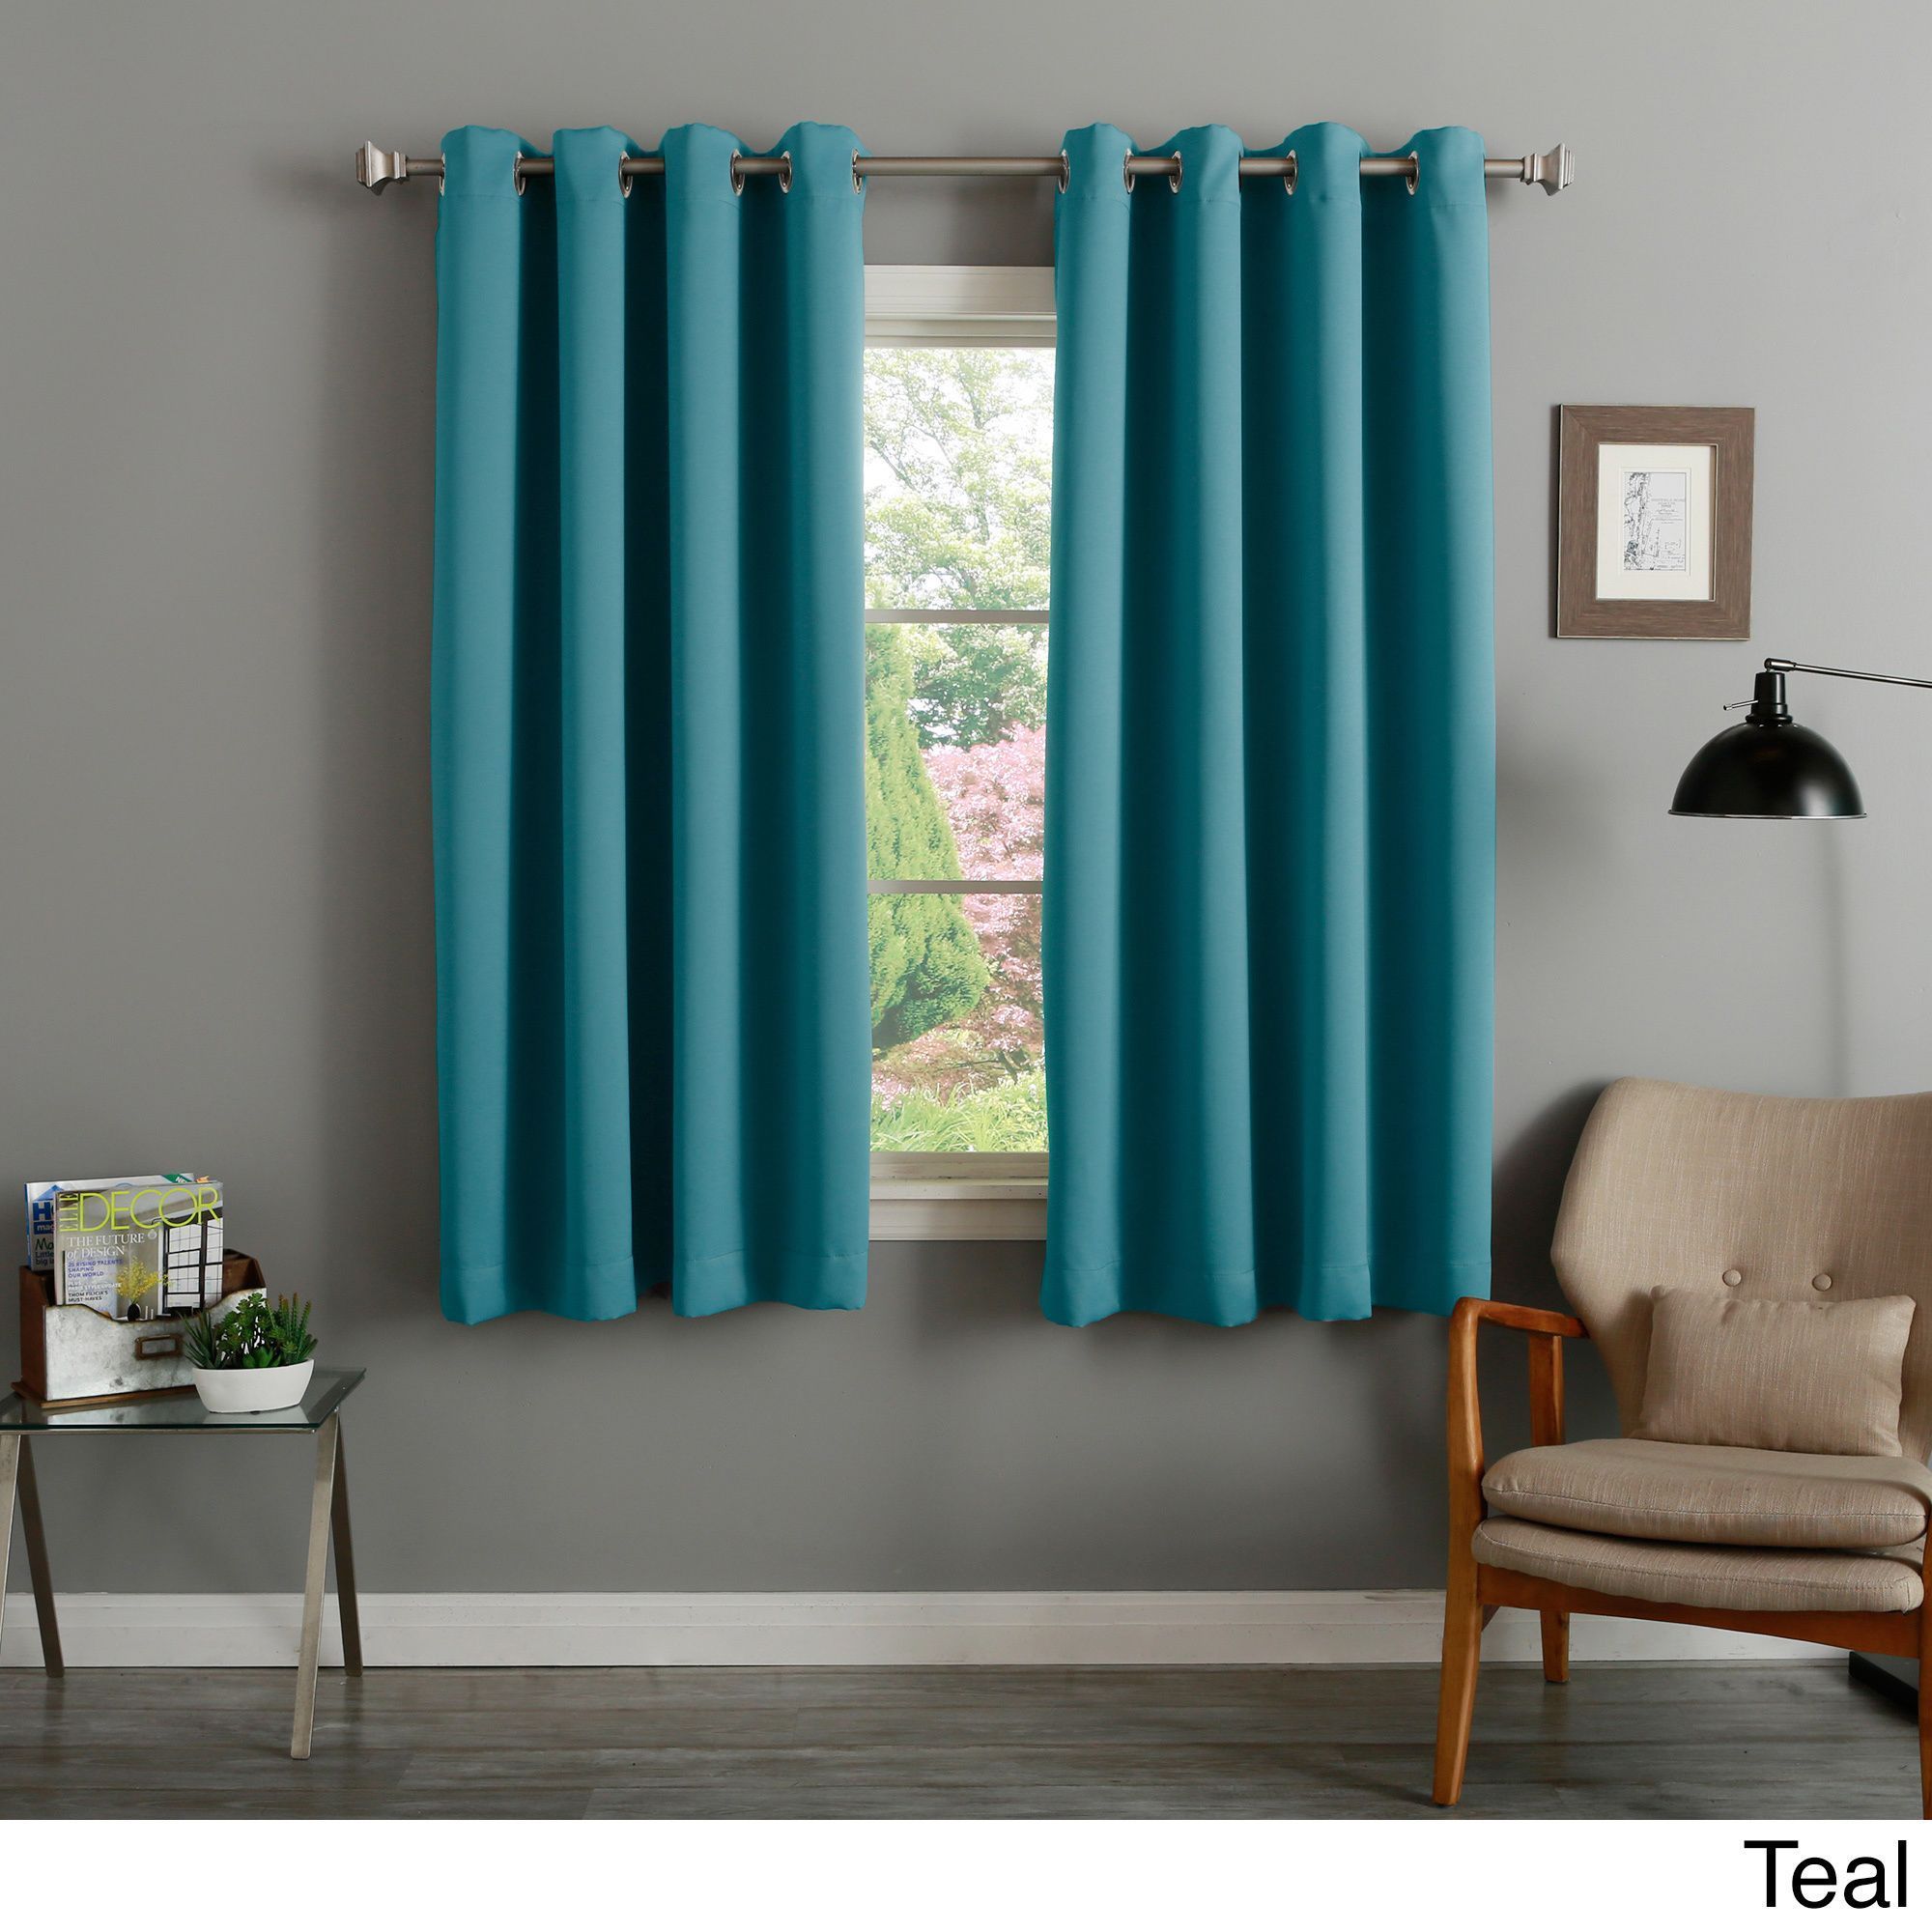 Aurora Home Silver Grommet Top Thermal Insulated 63 Inch For Insulated Blackout Grommet Window Curtain Panel Pairs (View 20 of 20)